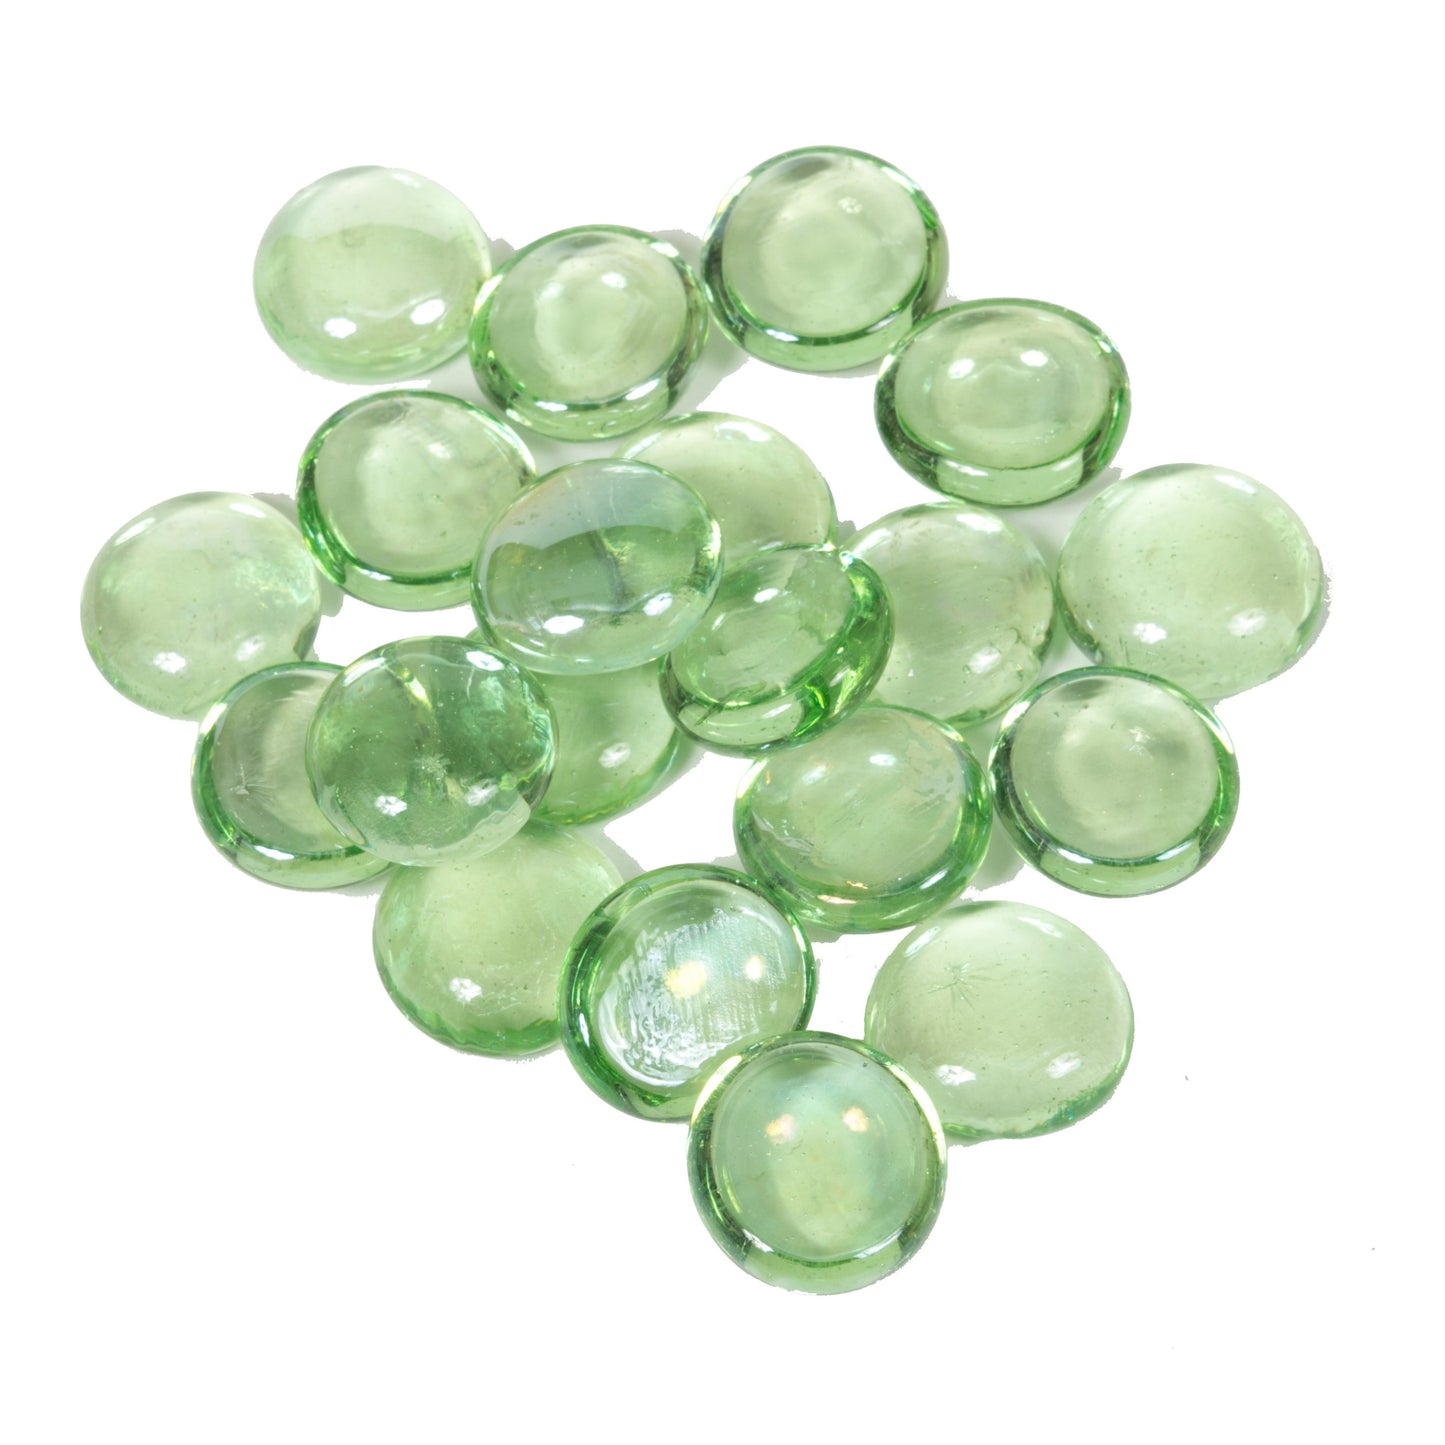 Tempered Glass Fire Beads 3/4" Size